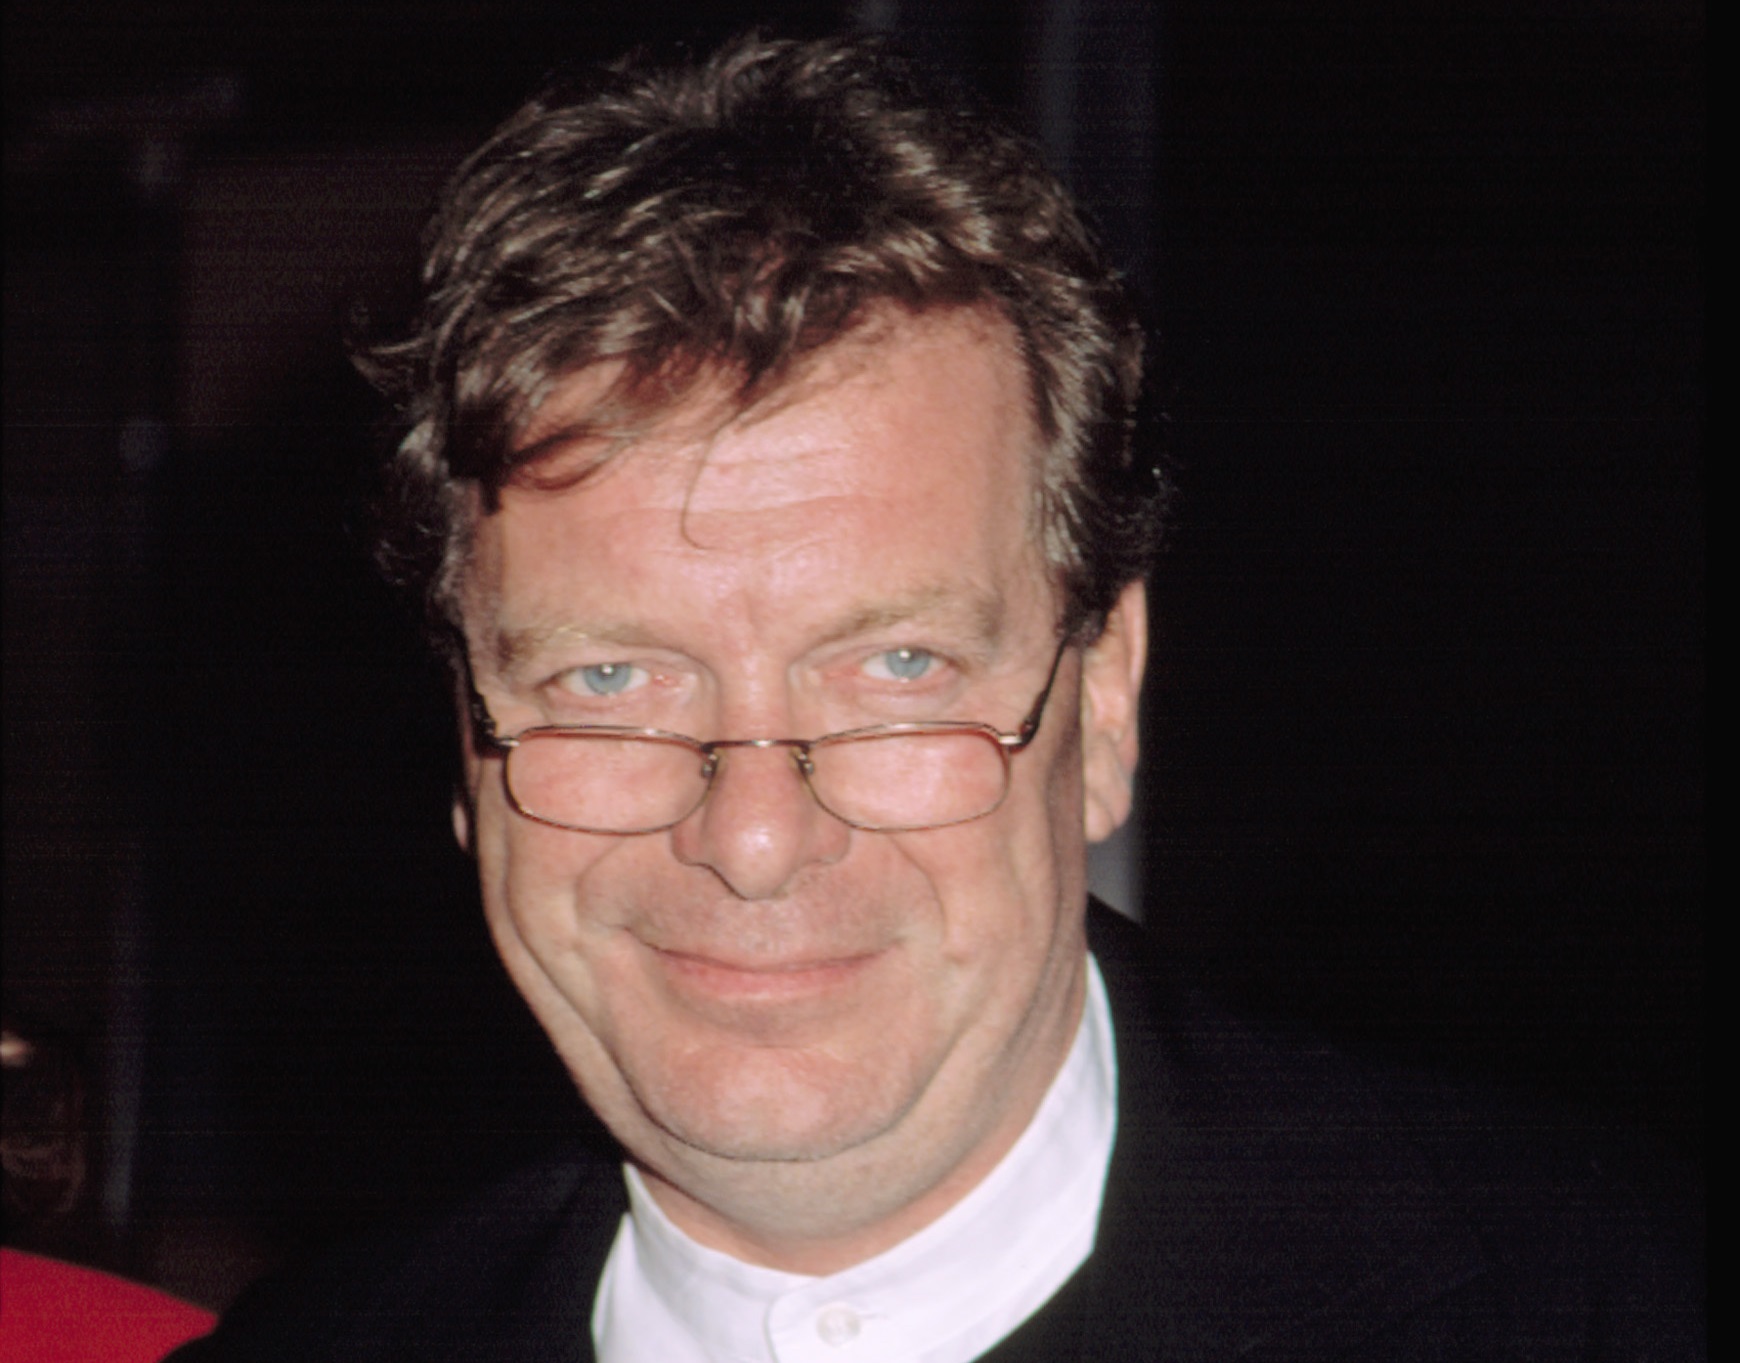 Tony Wilson was a fervent Manchester United fan and best known in England for the Granada Reports - He died in 2007 at the age of 57. Photo: Shutterstock